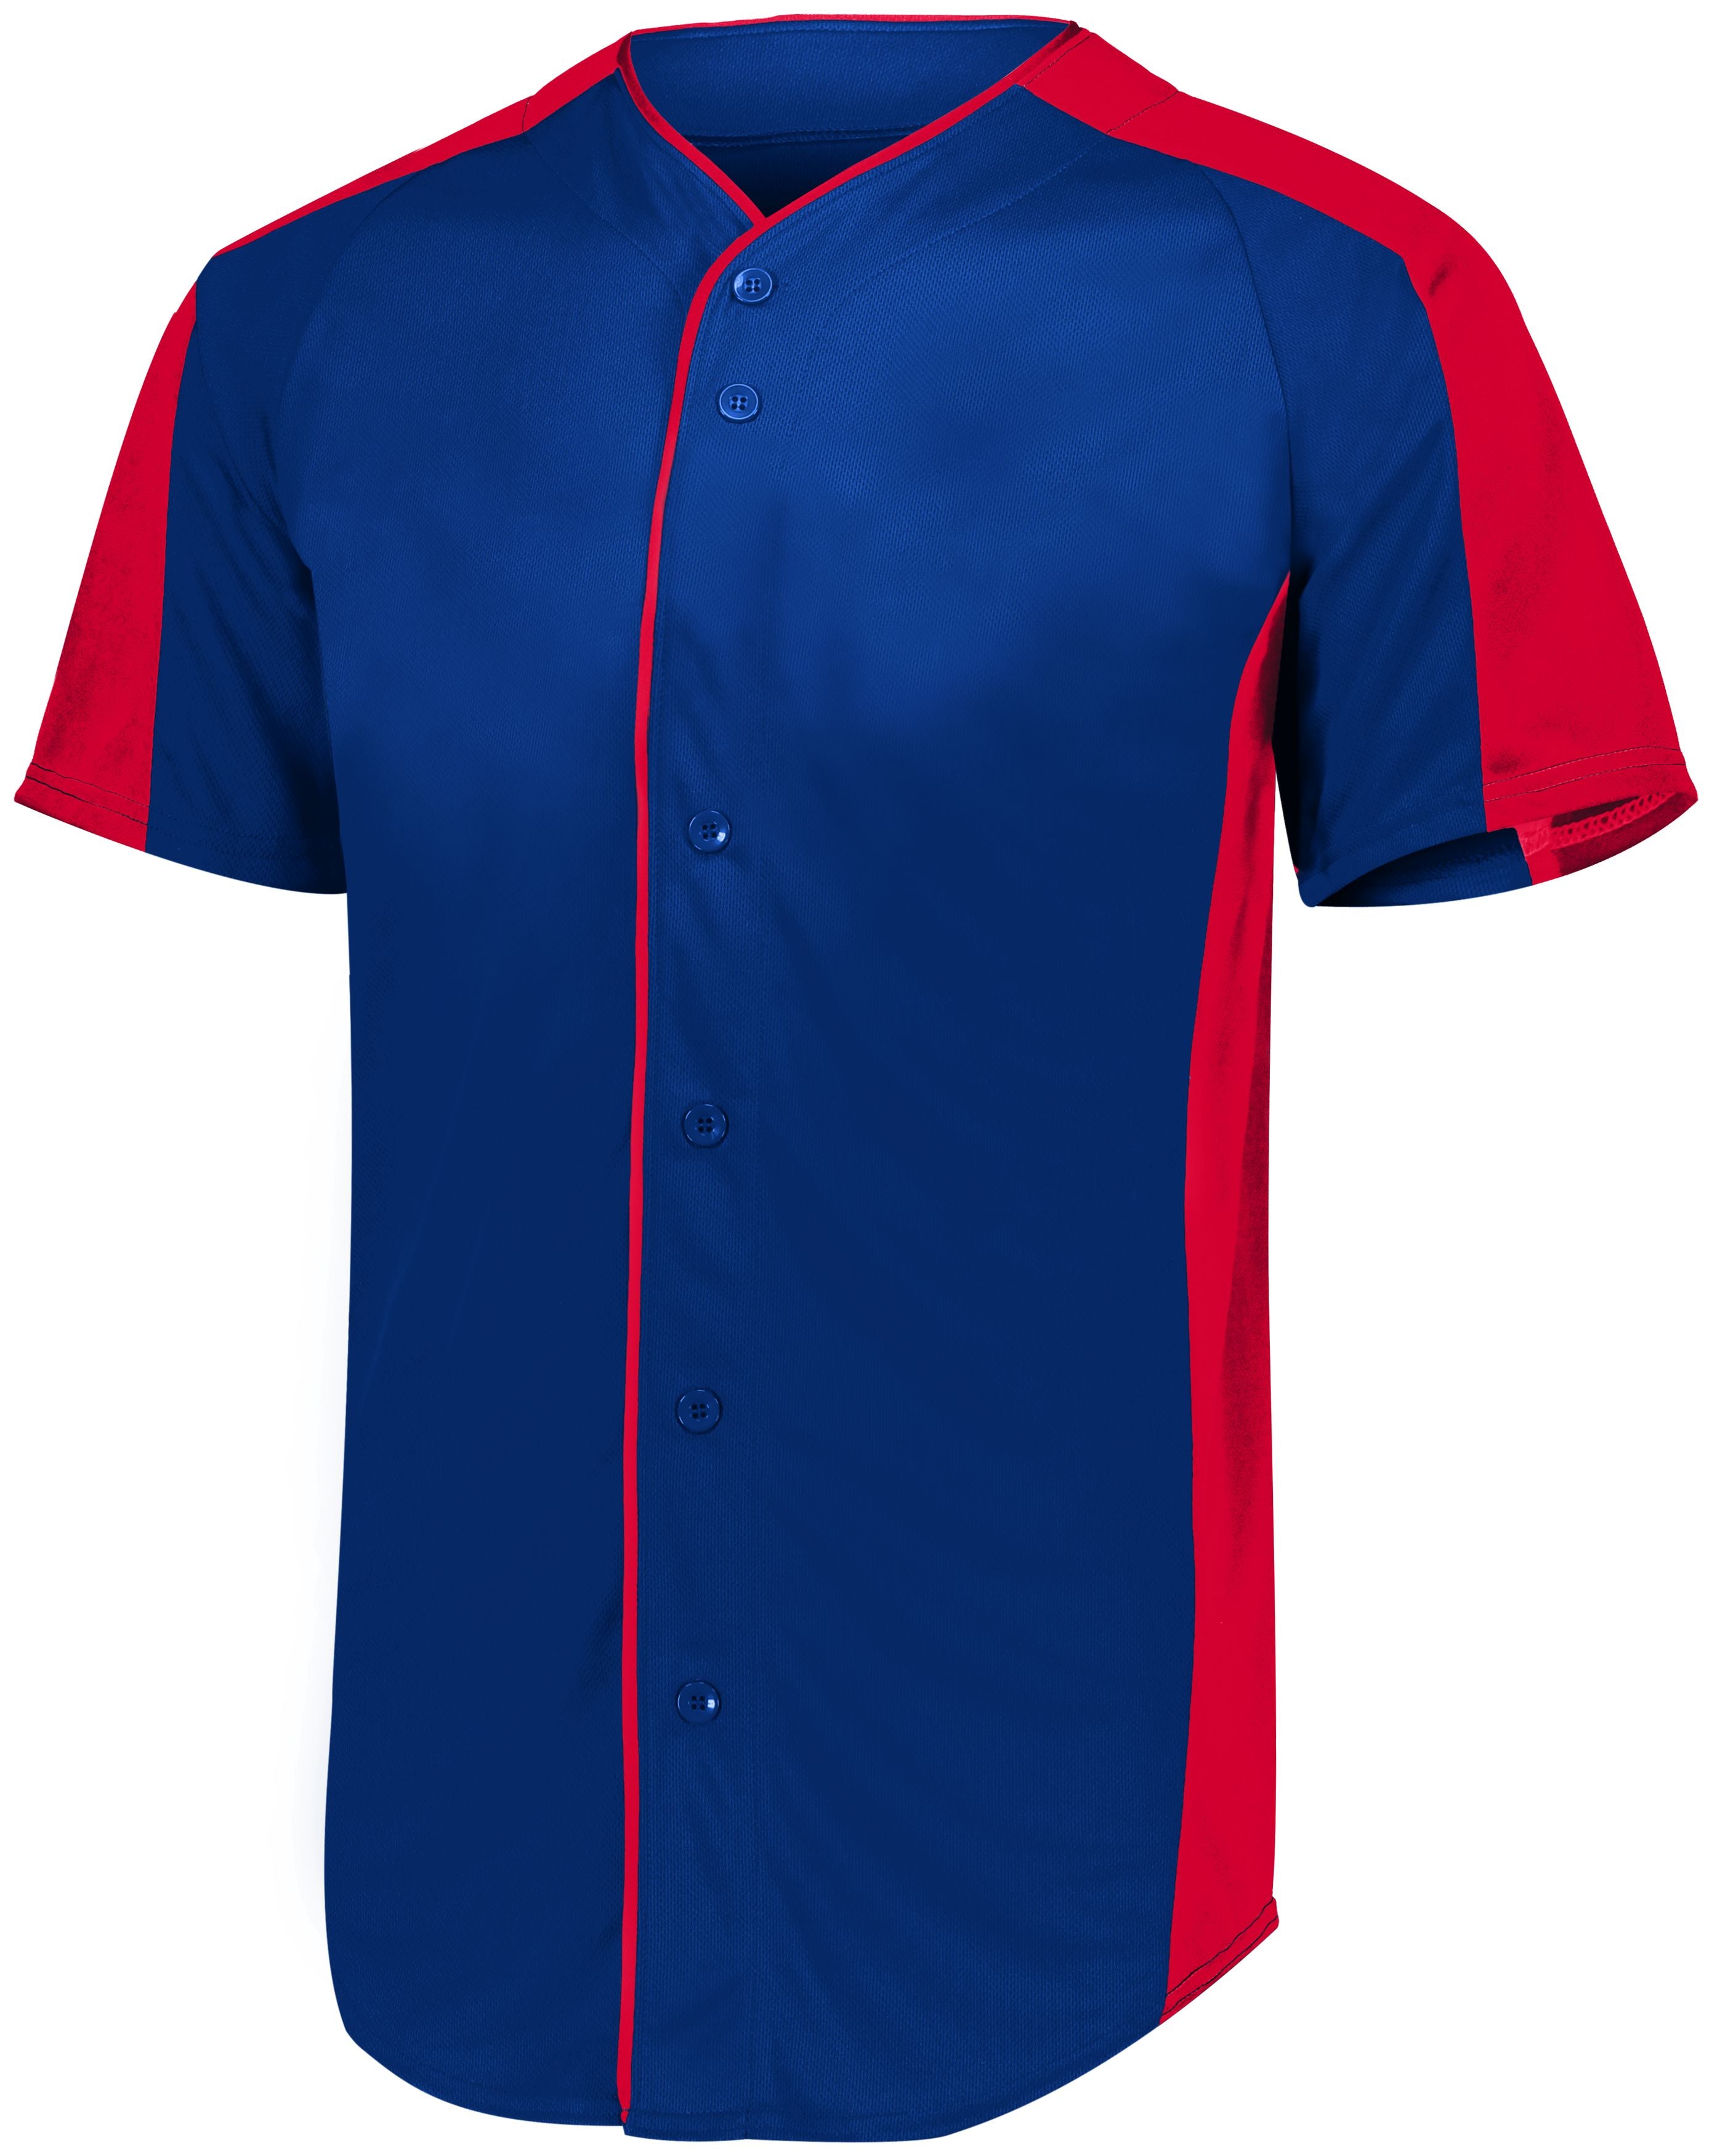 Augusta Sportswear Full-Button Baseball Jersey in Navy/Red  -Part of the Adult, Adult-Jersey, Augusta-Products, Baseball, Shirts, All-Sports, All-Sports-1 product lines at KanaleyCreations.com